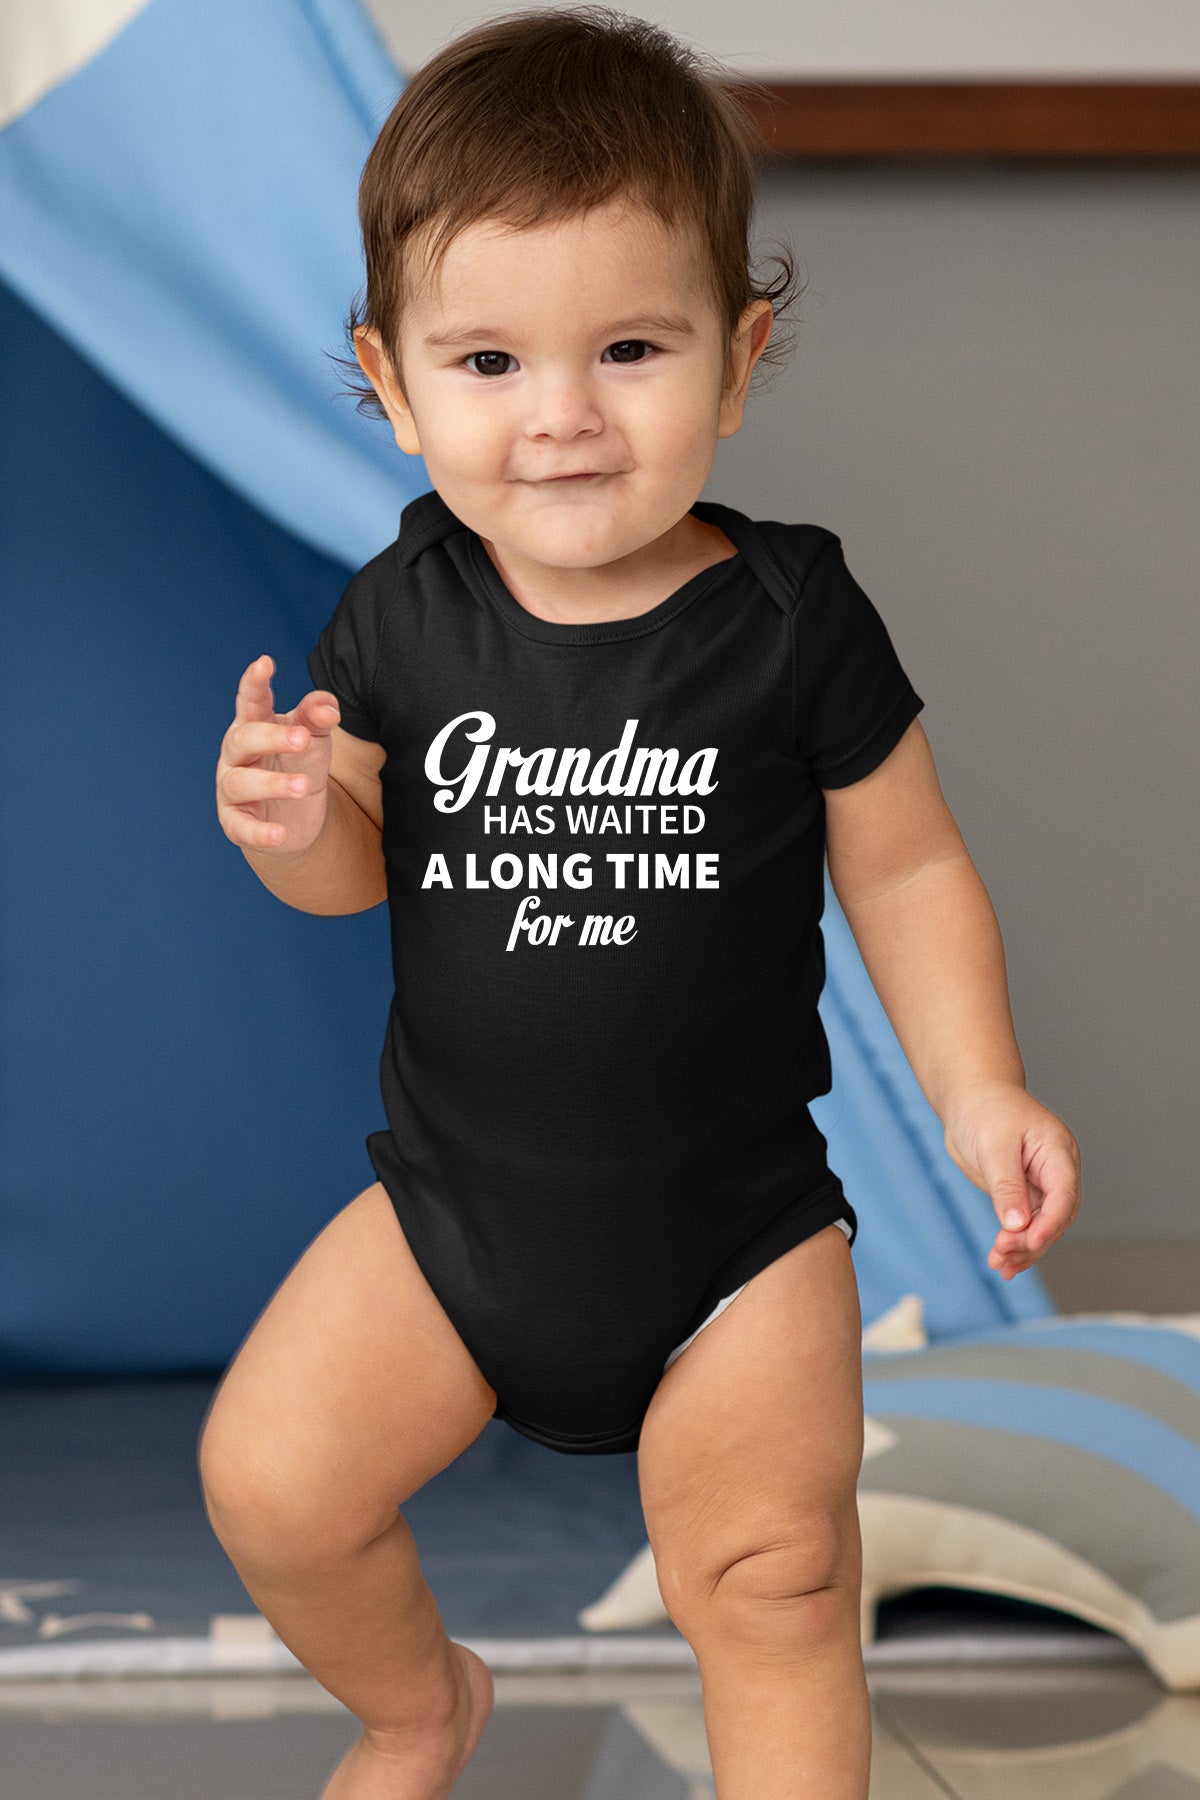 Grandma has Waited a long time For Me Baby Bodysuit